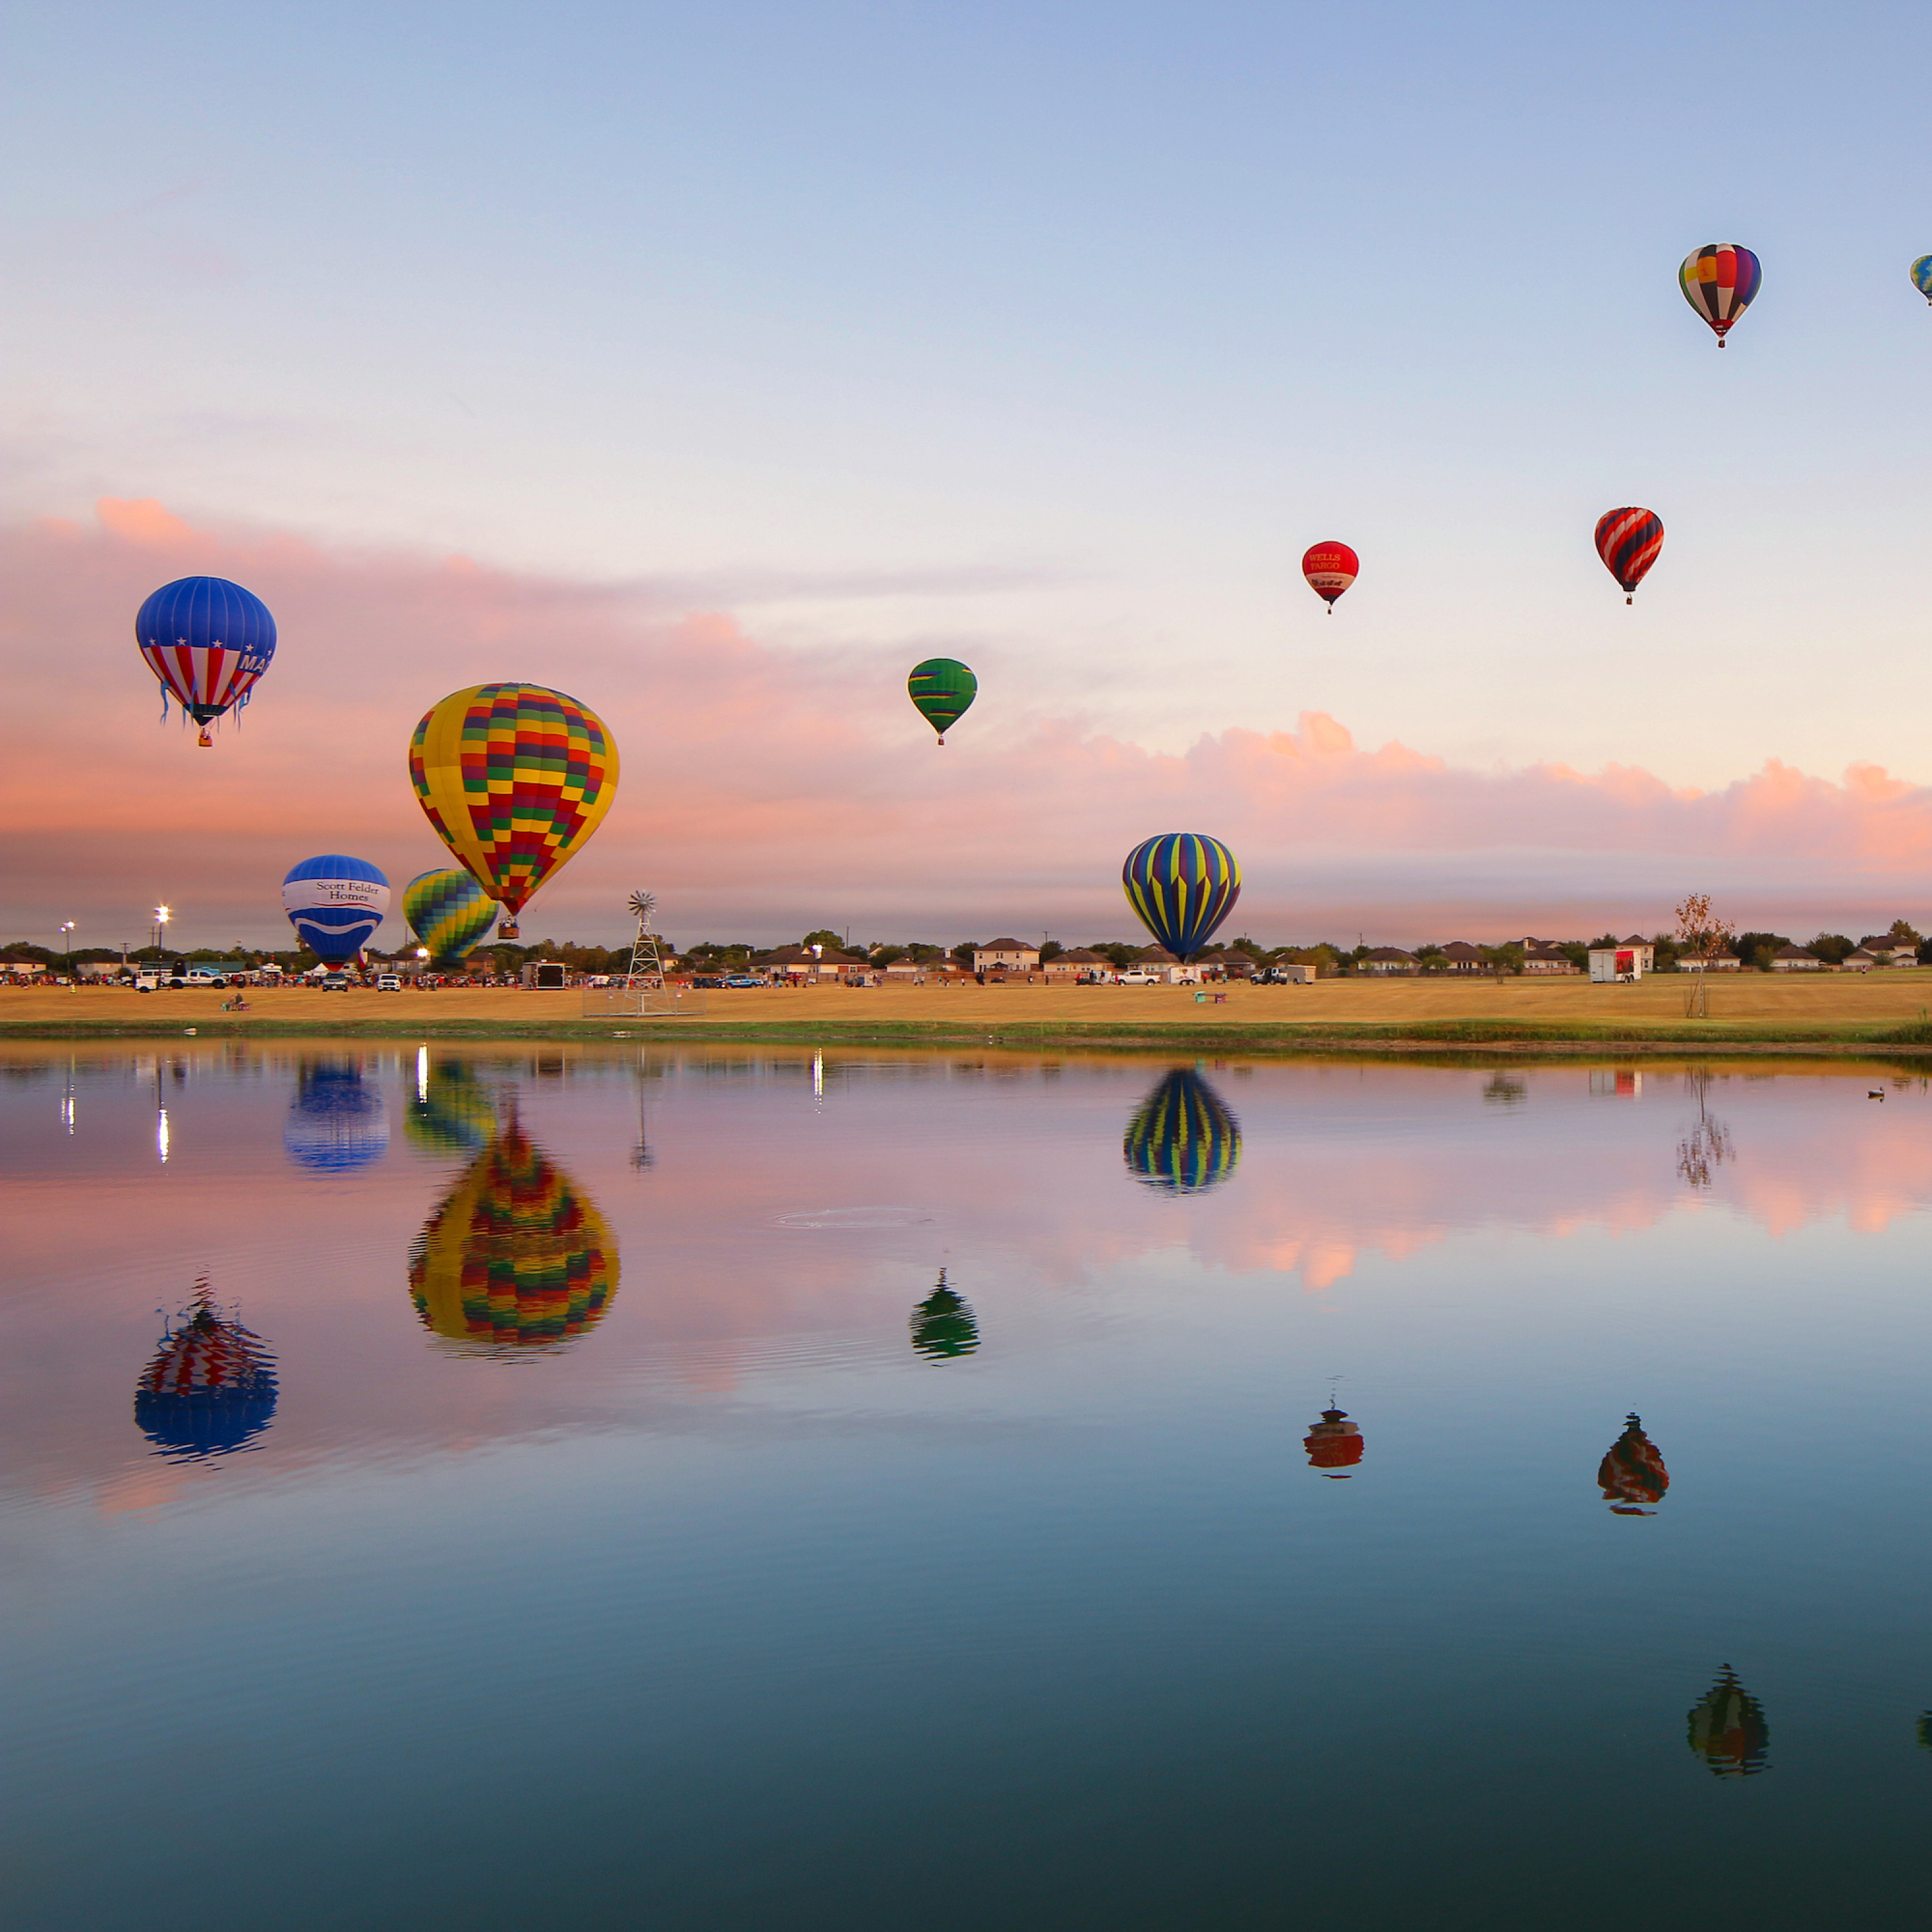 Hot air balloons over a pond